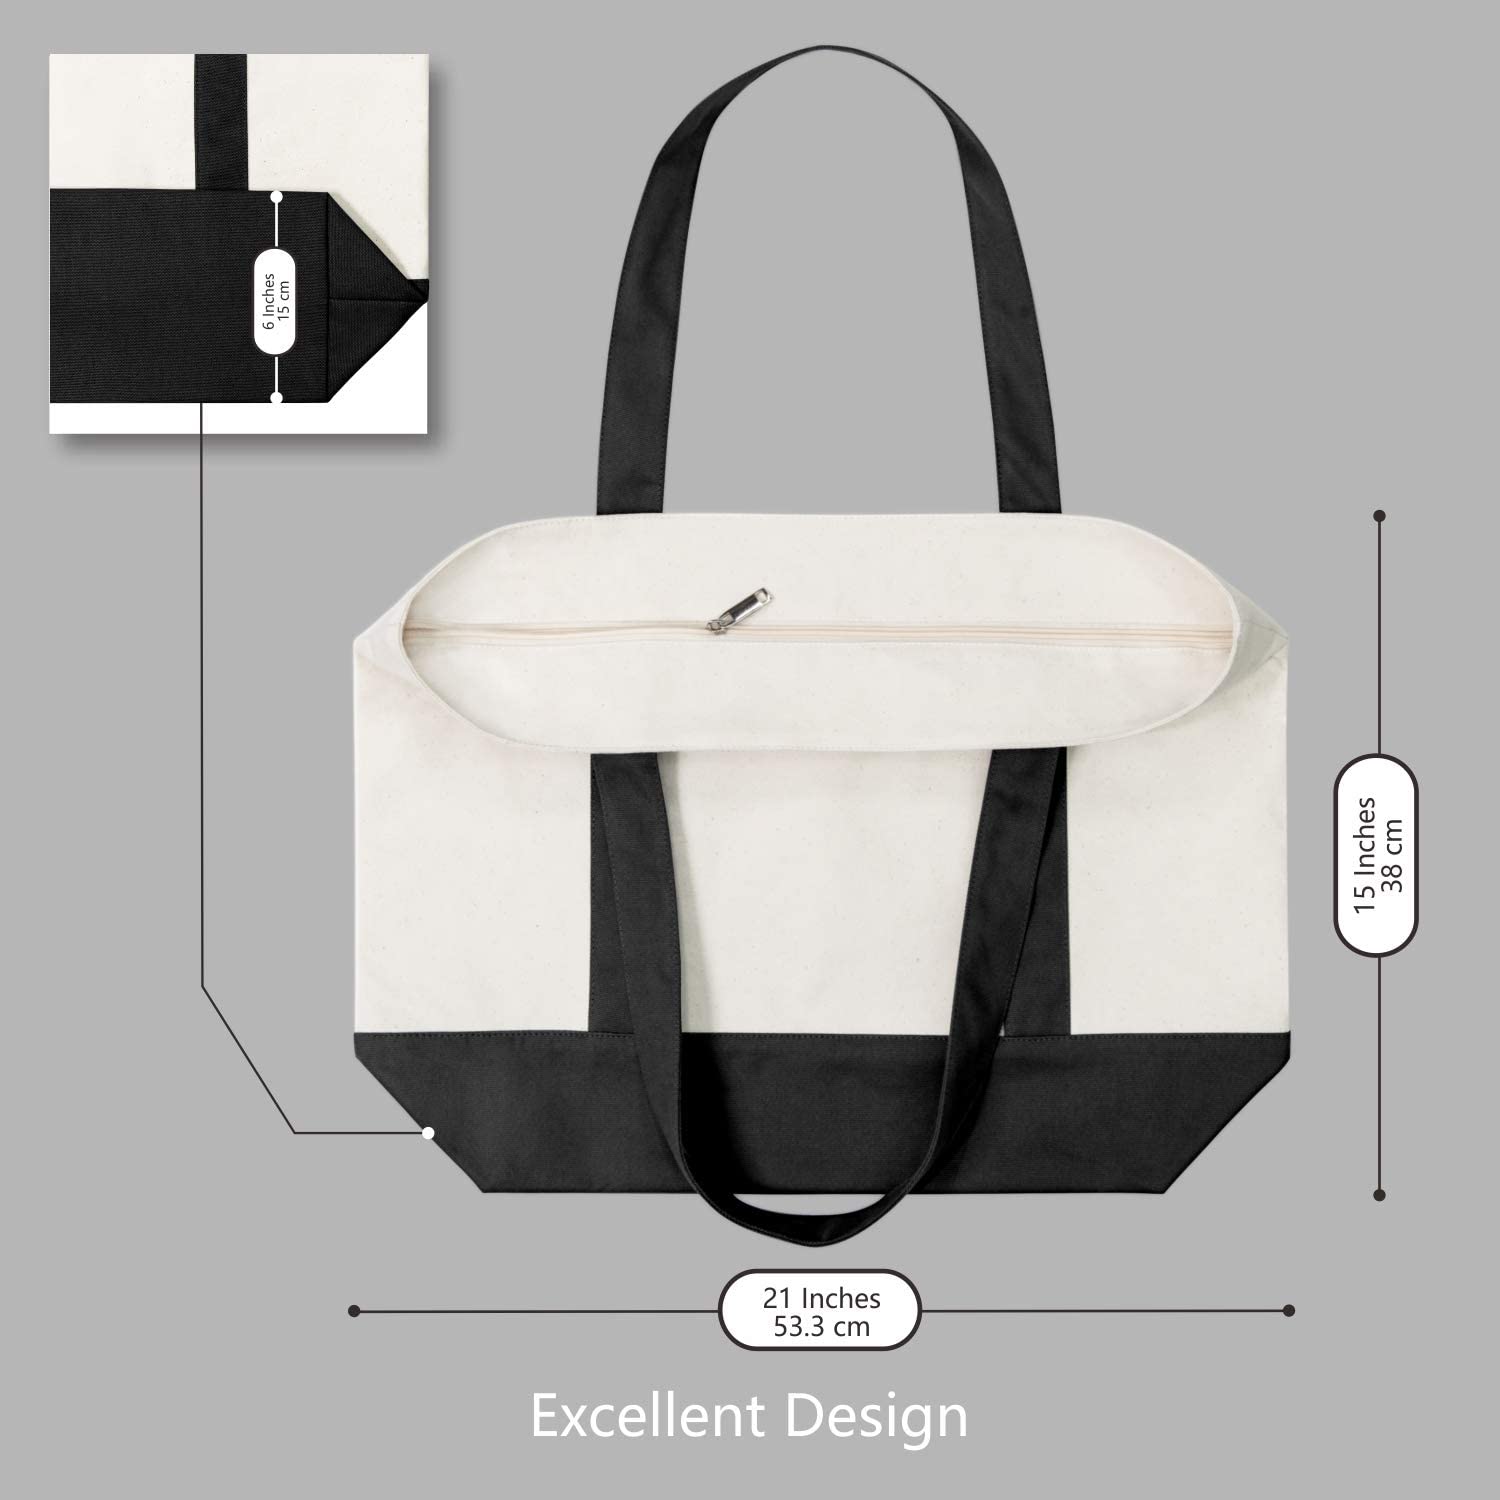 Stylish Canvas Tote Bag with an External Pocket Top Zipper Closure Daily Essentials Bag Manufacturer